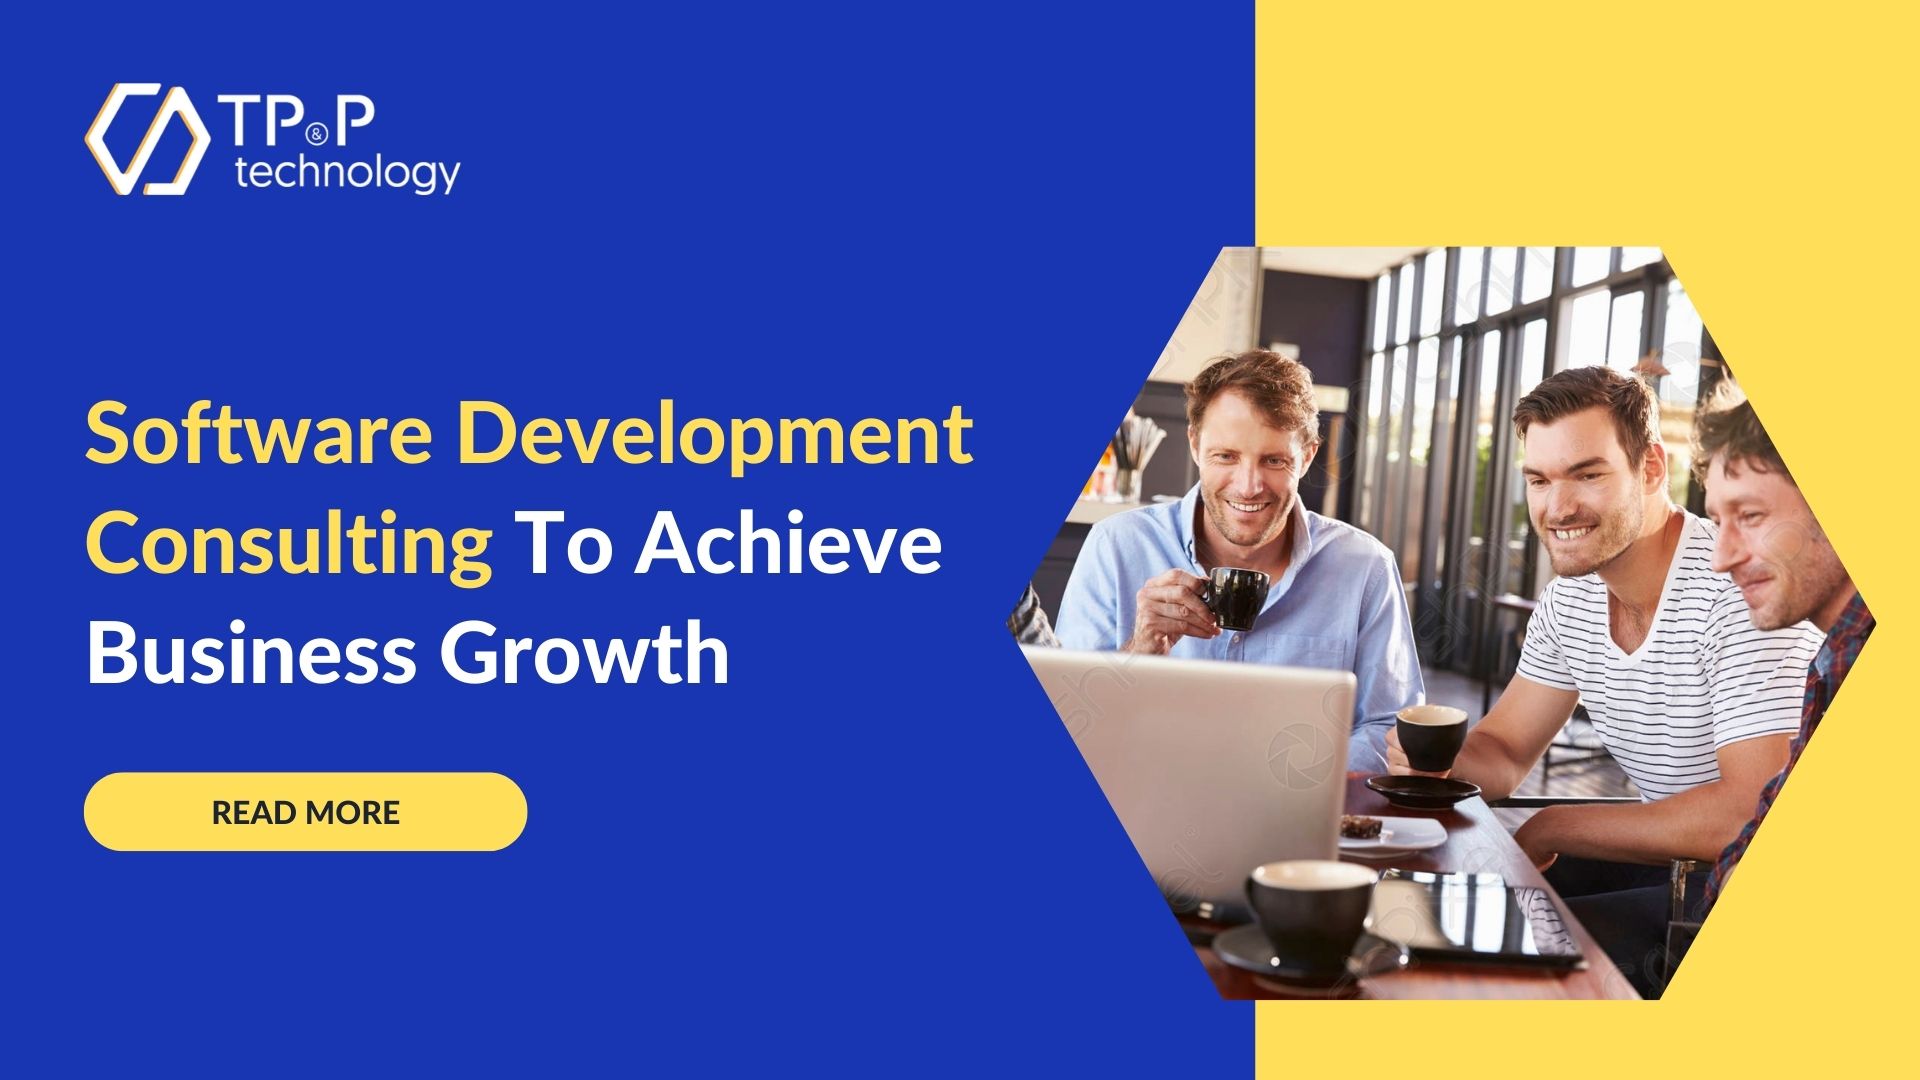 Software Development Consulting To Achieve Business Growth